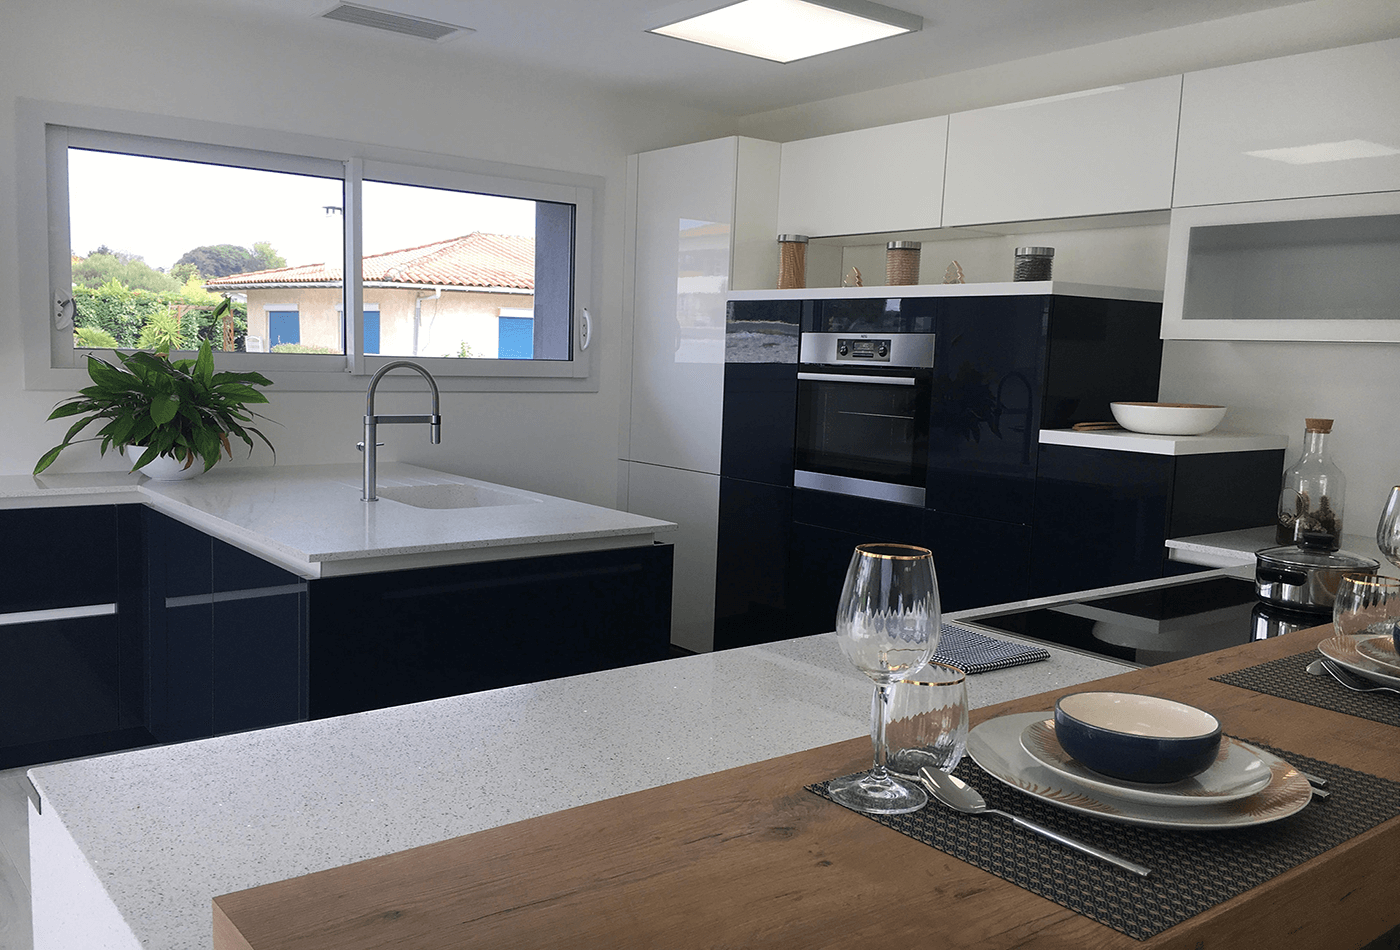 Describe the Wide Range of Advantages of Stellar Silestone Surfaces